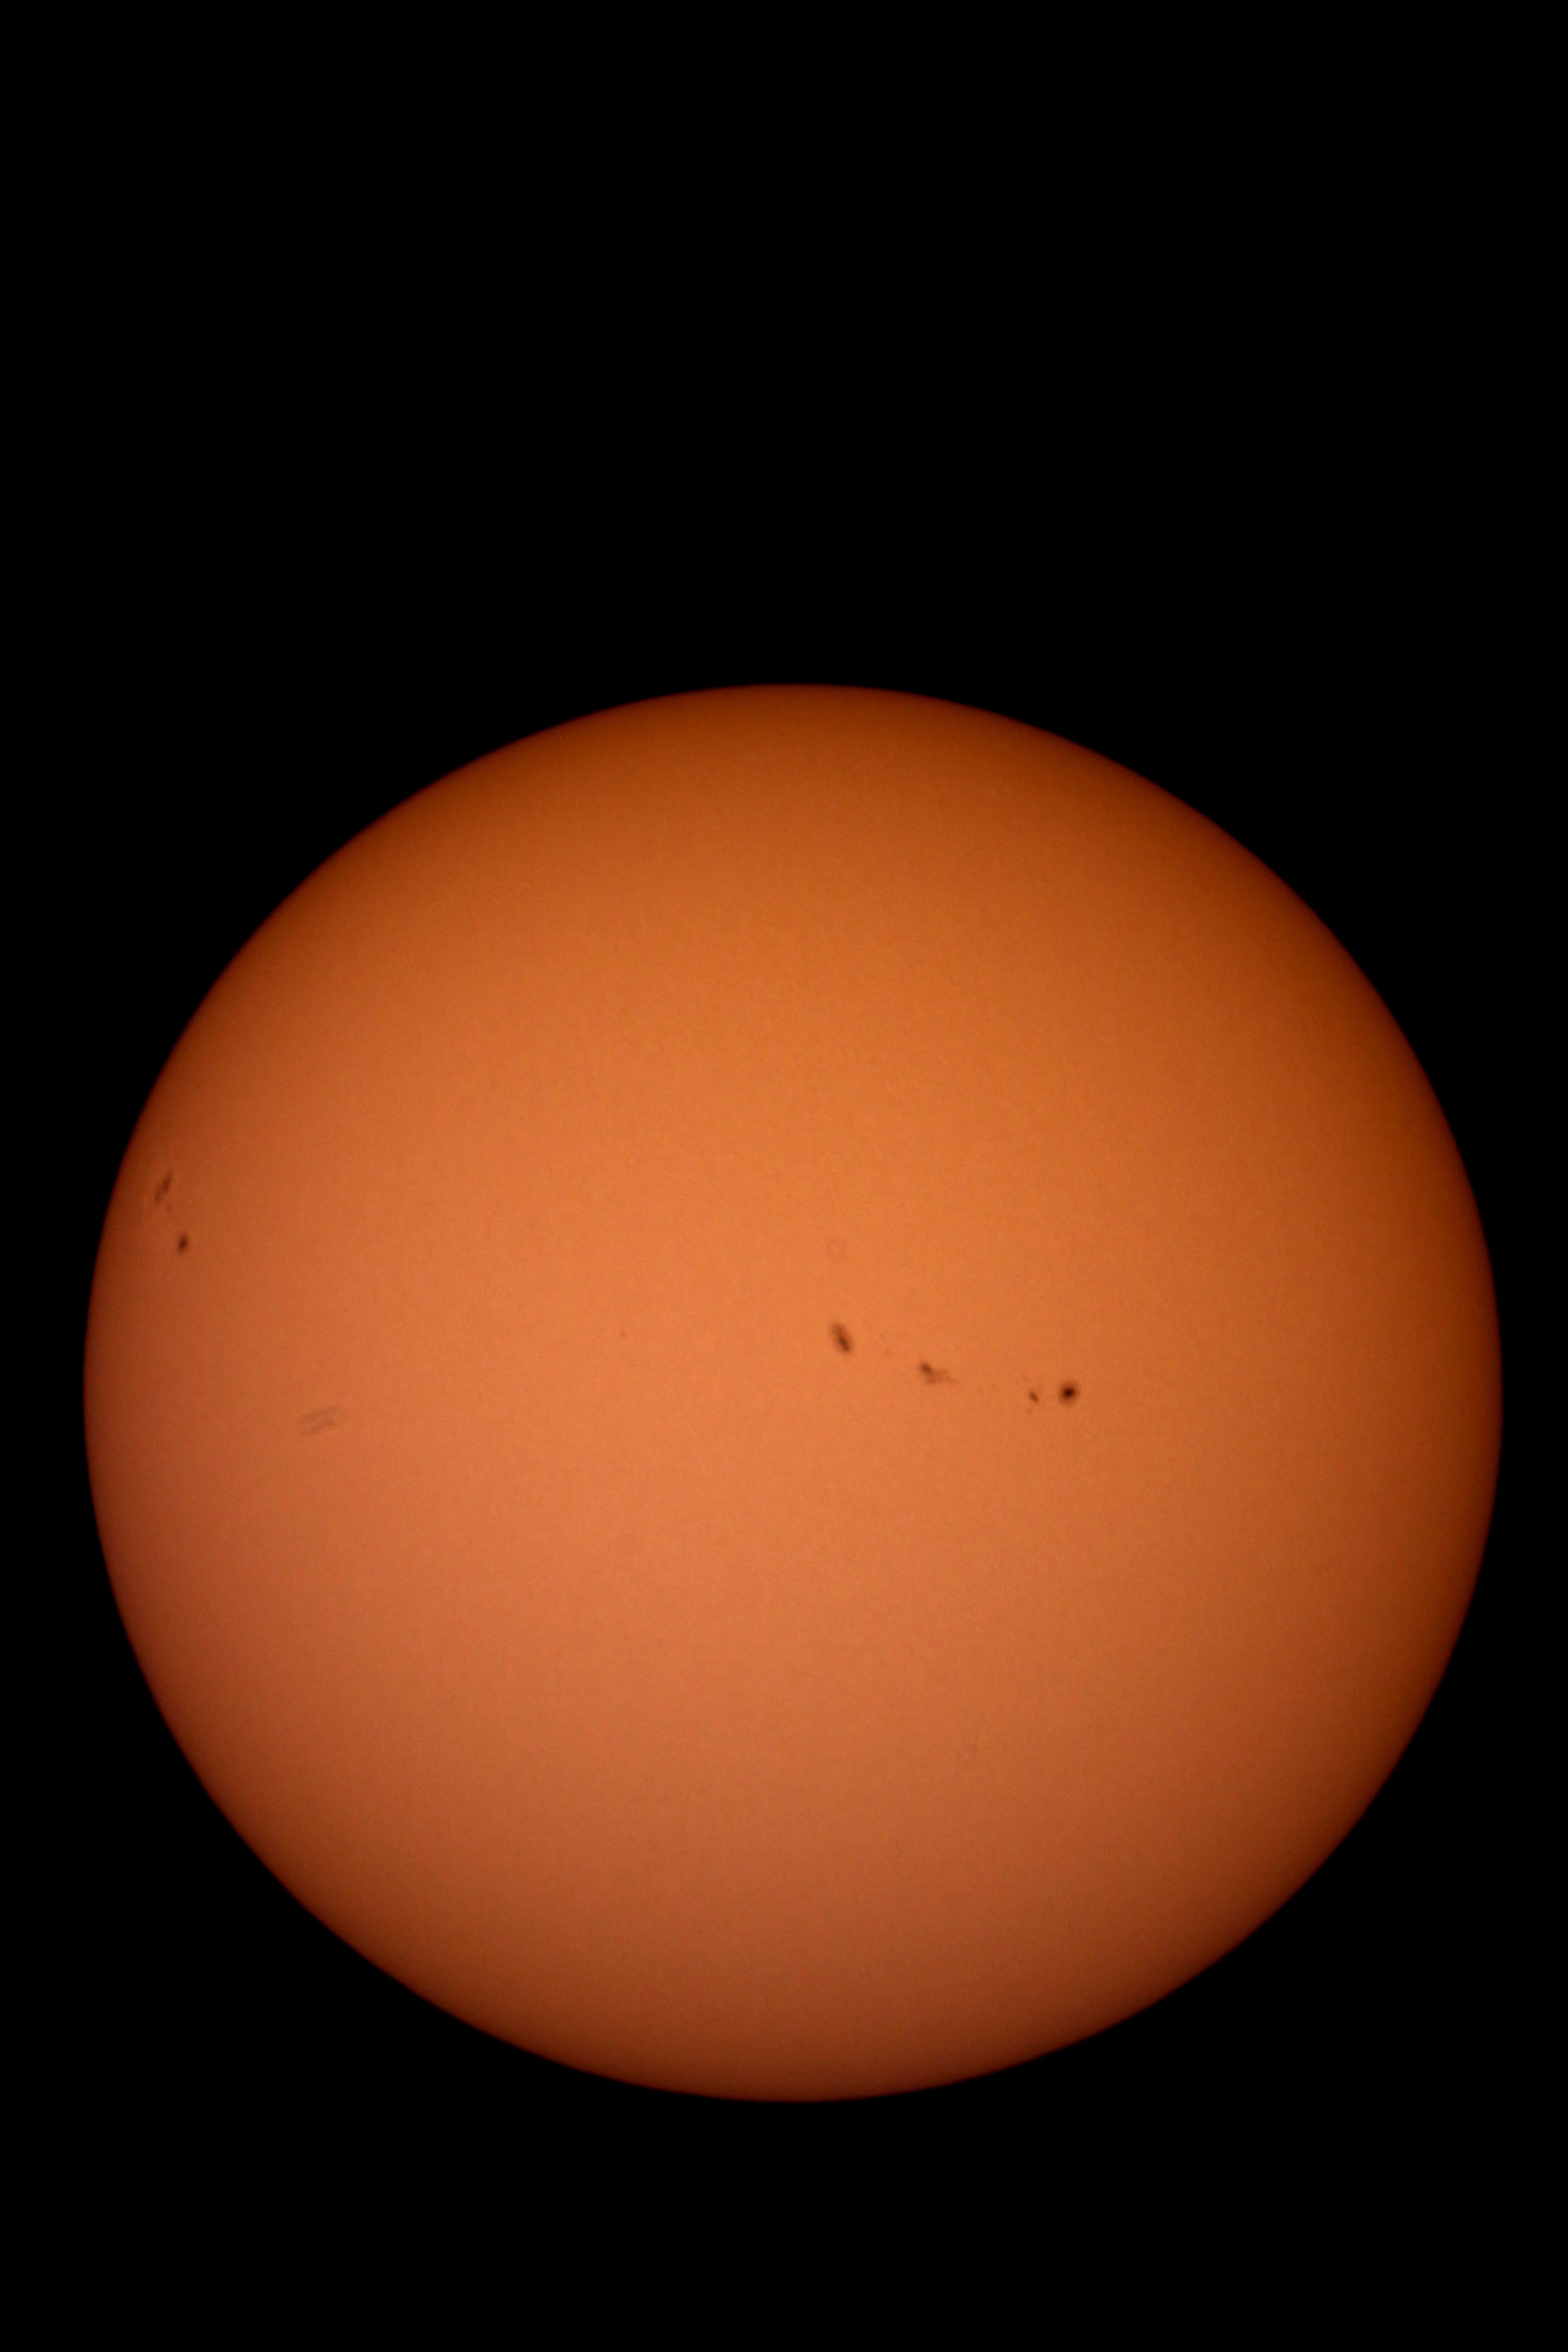 Pre-Eclipse with Sunspots